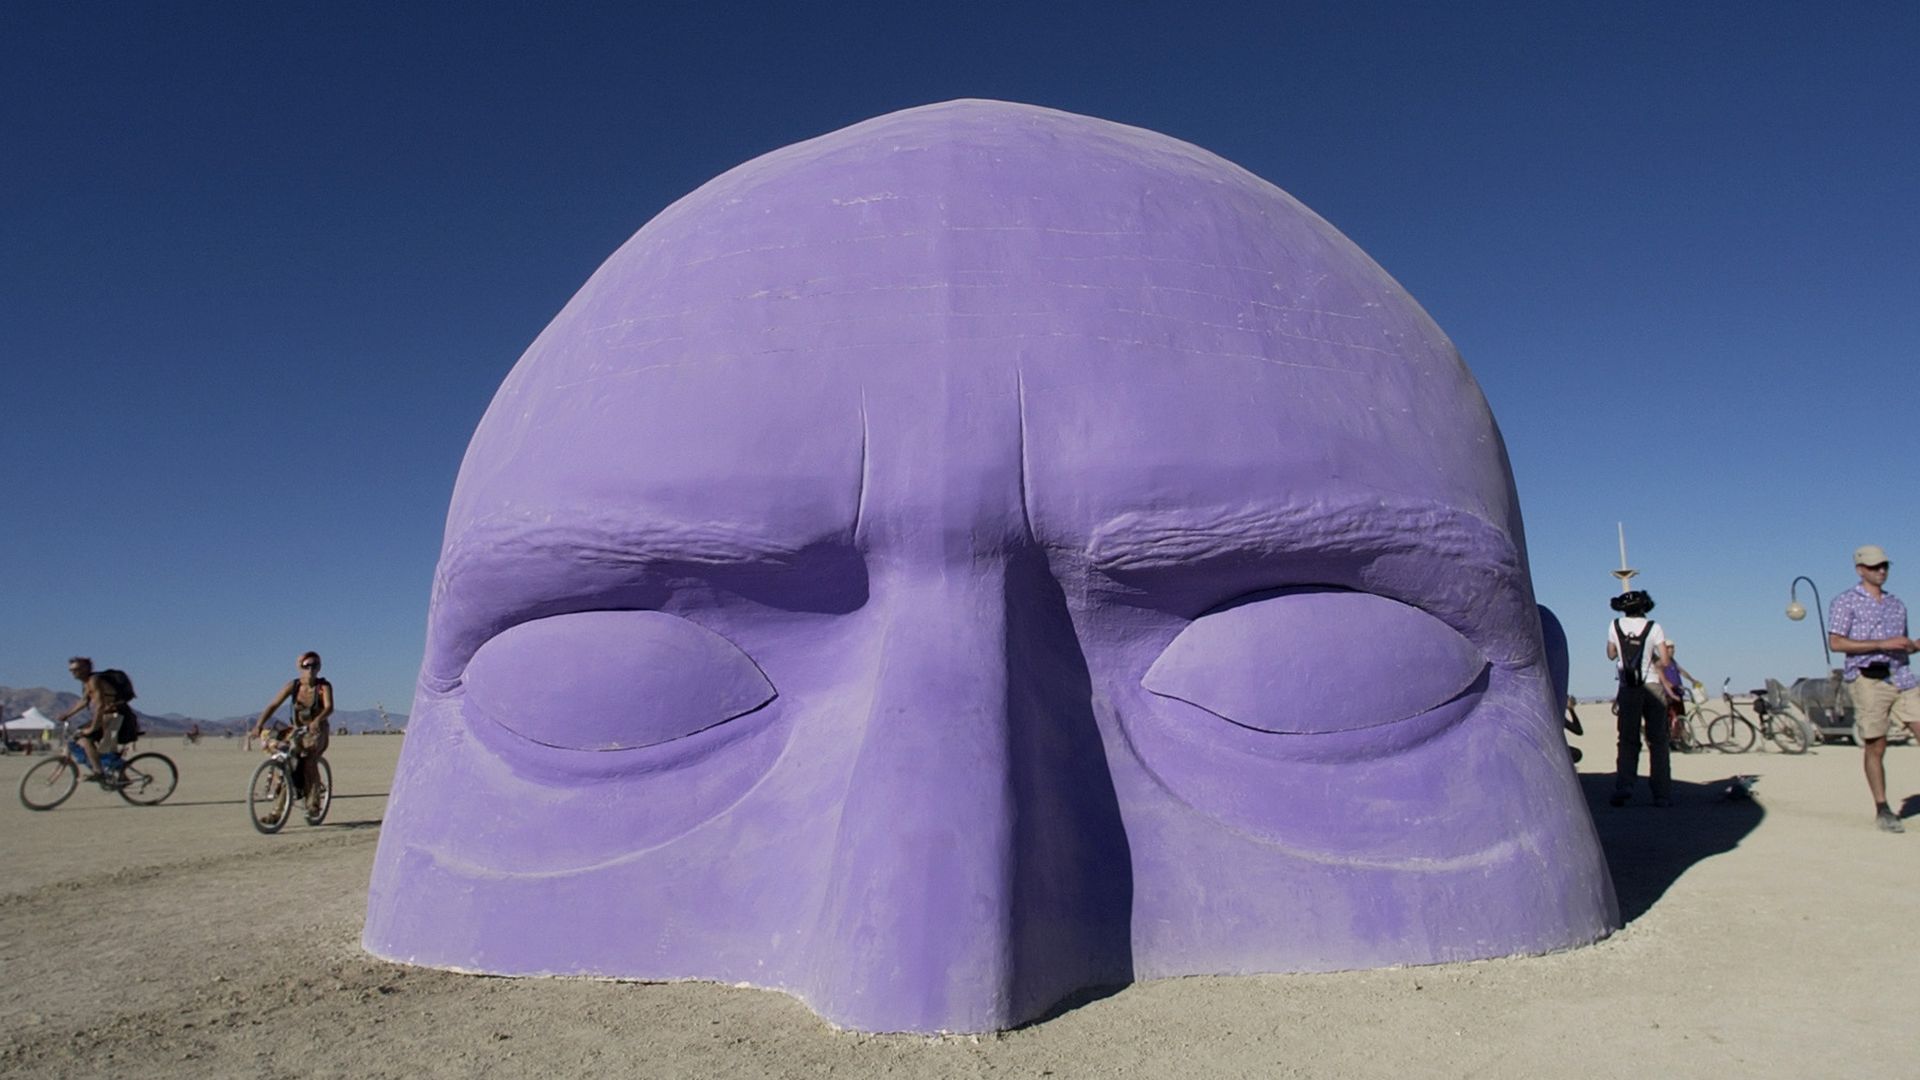 An art installation at Burning Man. It looks like a purple head rising out of the desert.